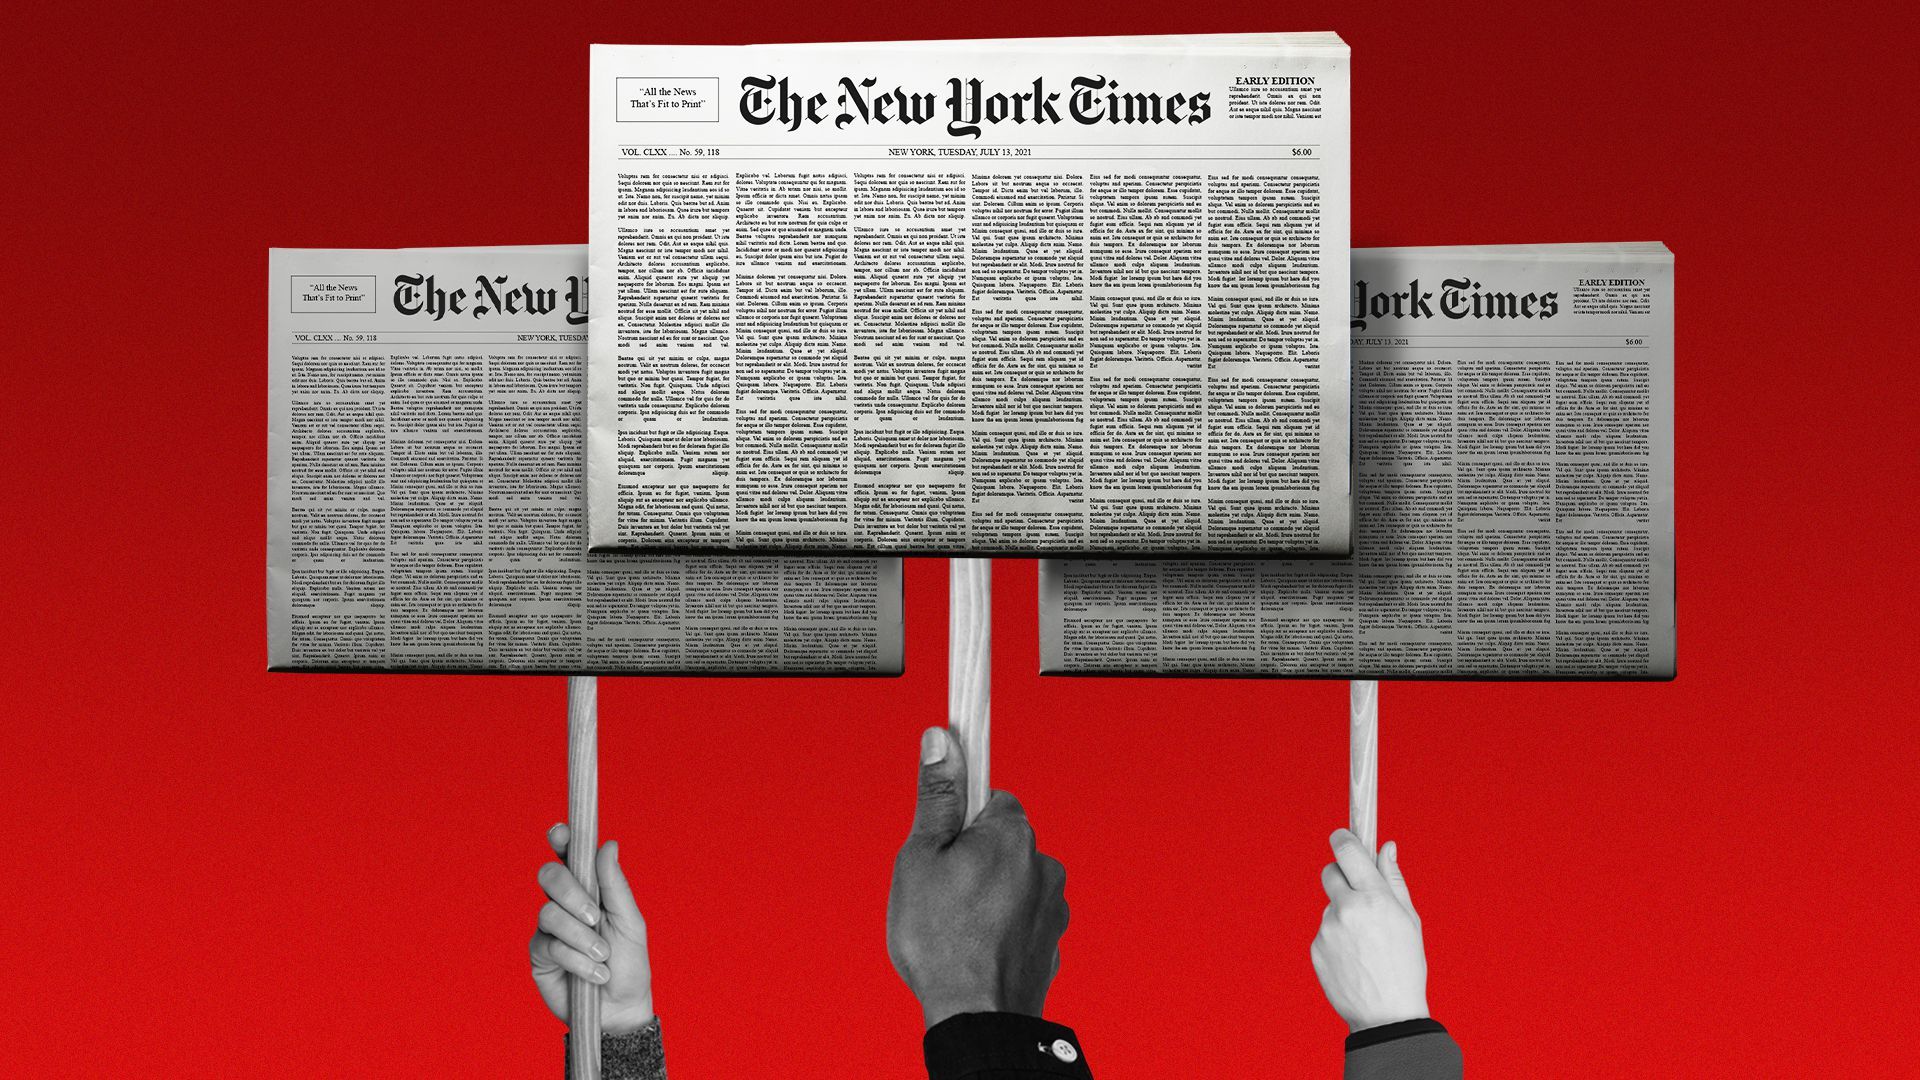 Illustration of people holding picket signs made of the front pages of The New York Times.